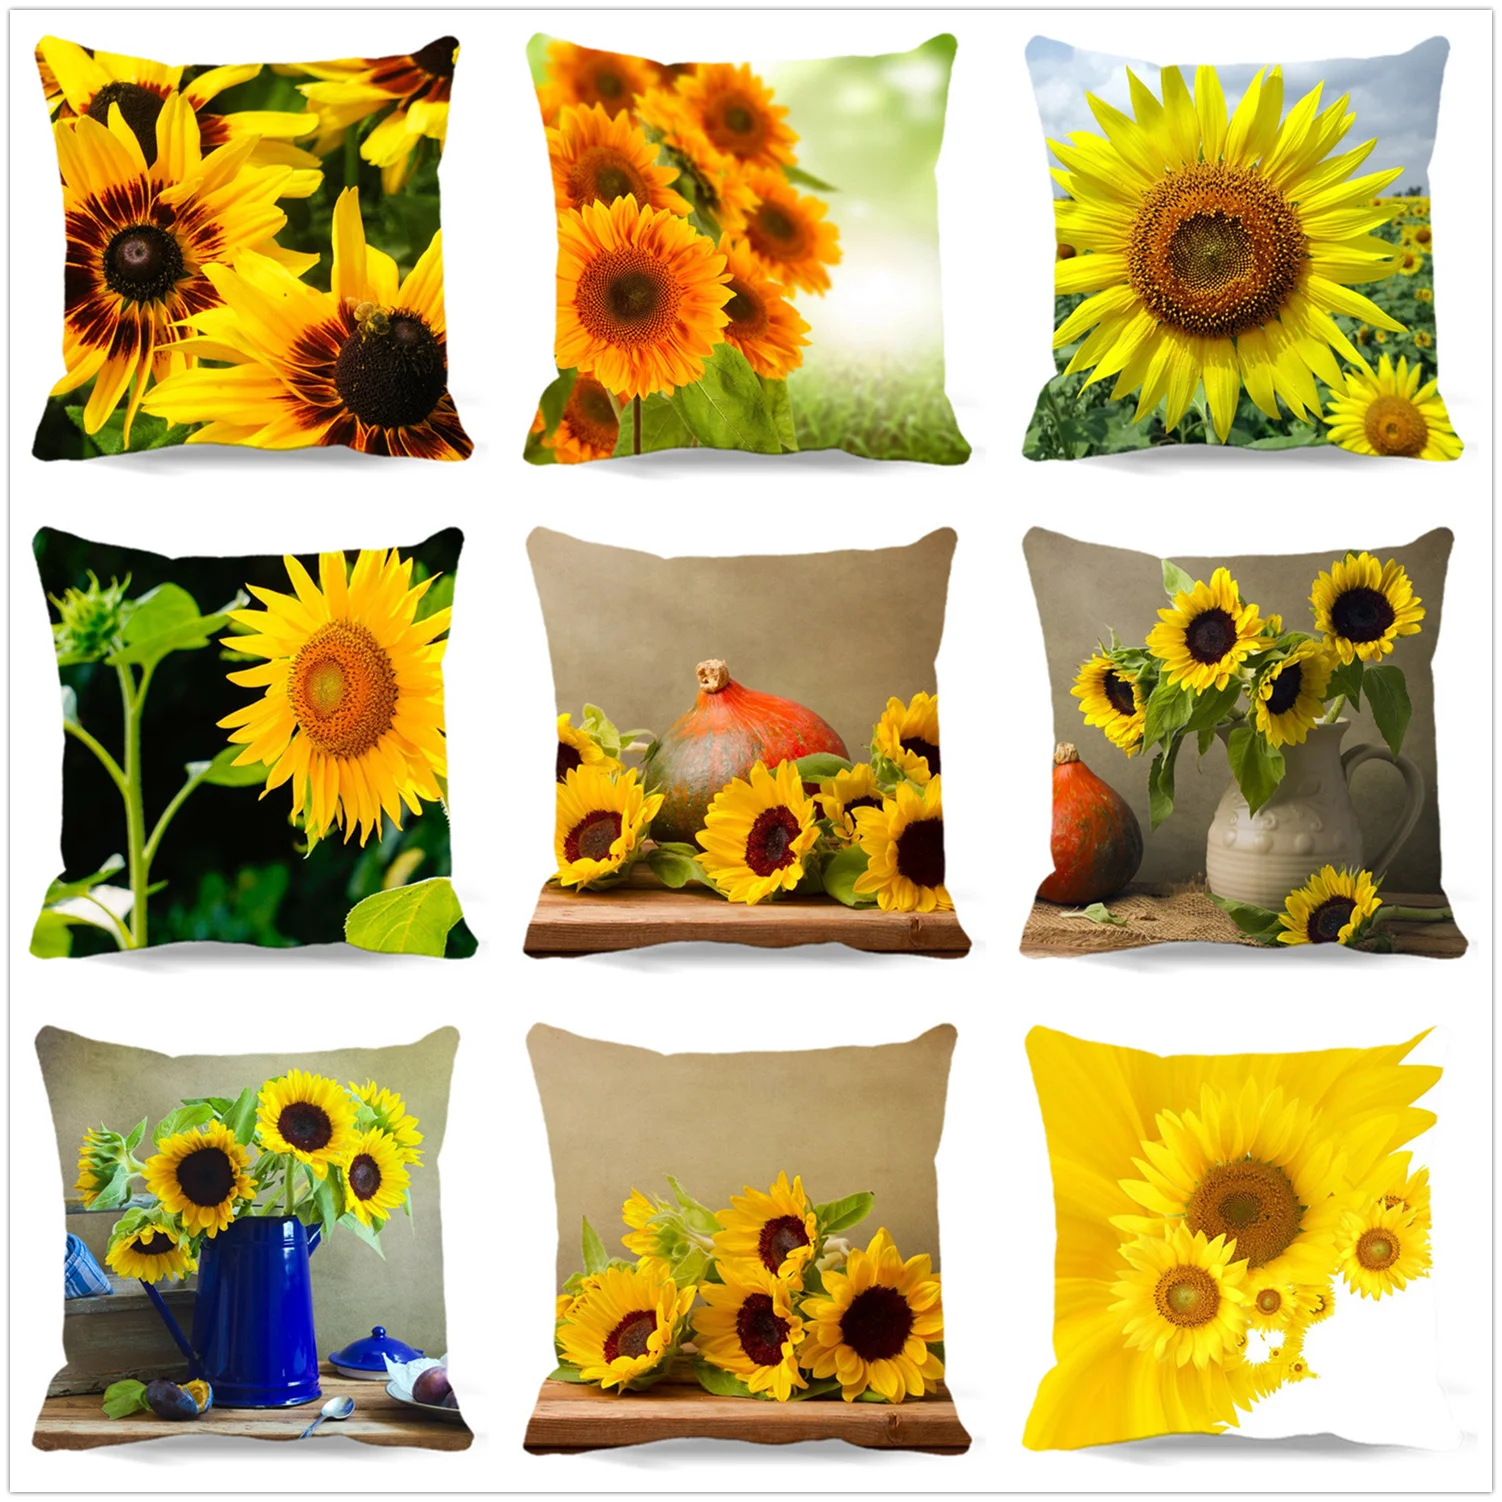 Sunflower Printed Square Pillow Case Home Decorative Soft Throw Cushion Cover 